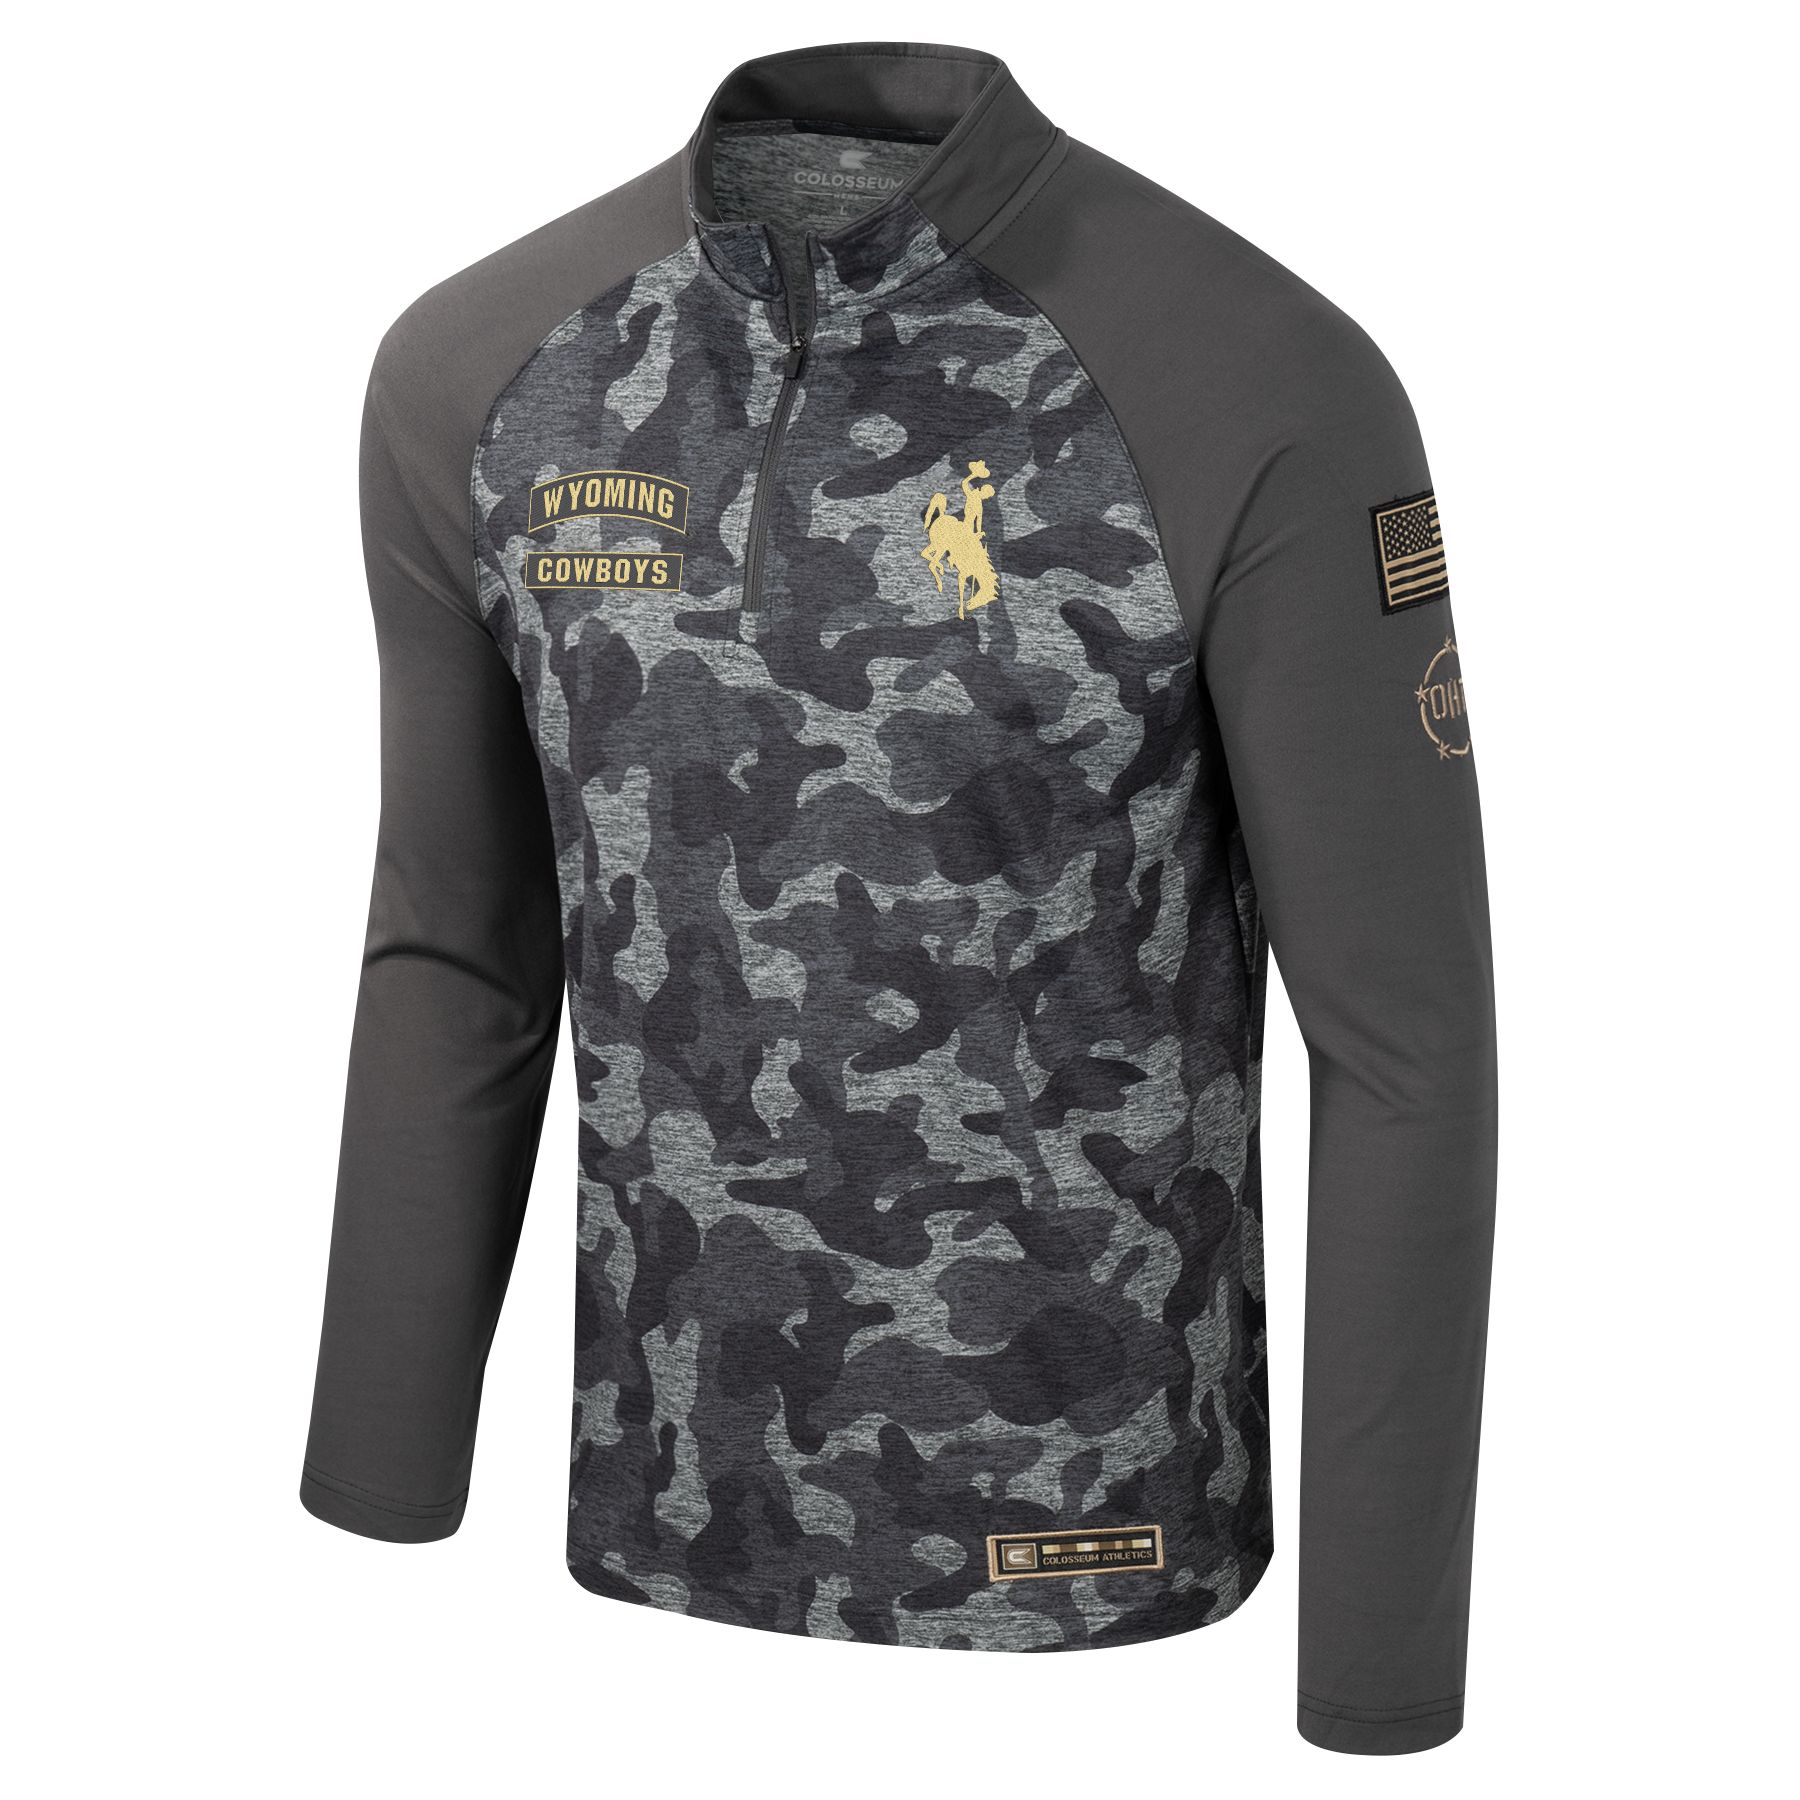 Wyoming Cowboys Surface to Air 1/4 Zip Wind Shirt - Pavement/Camo